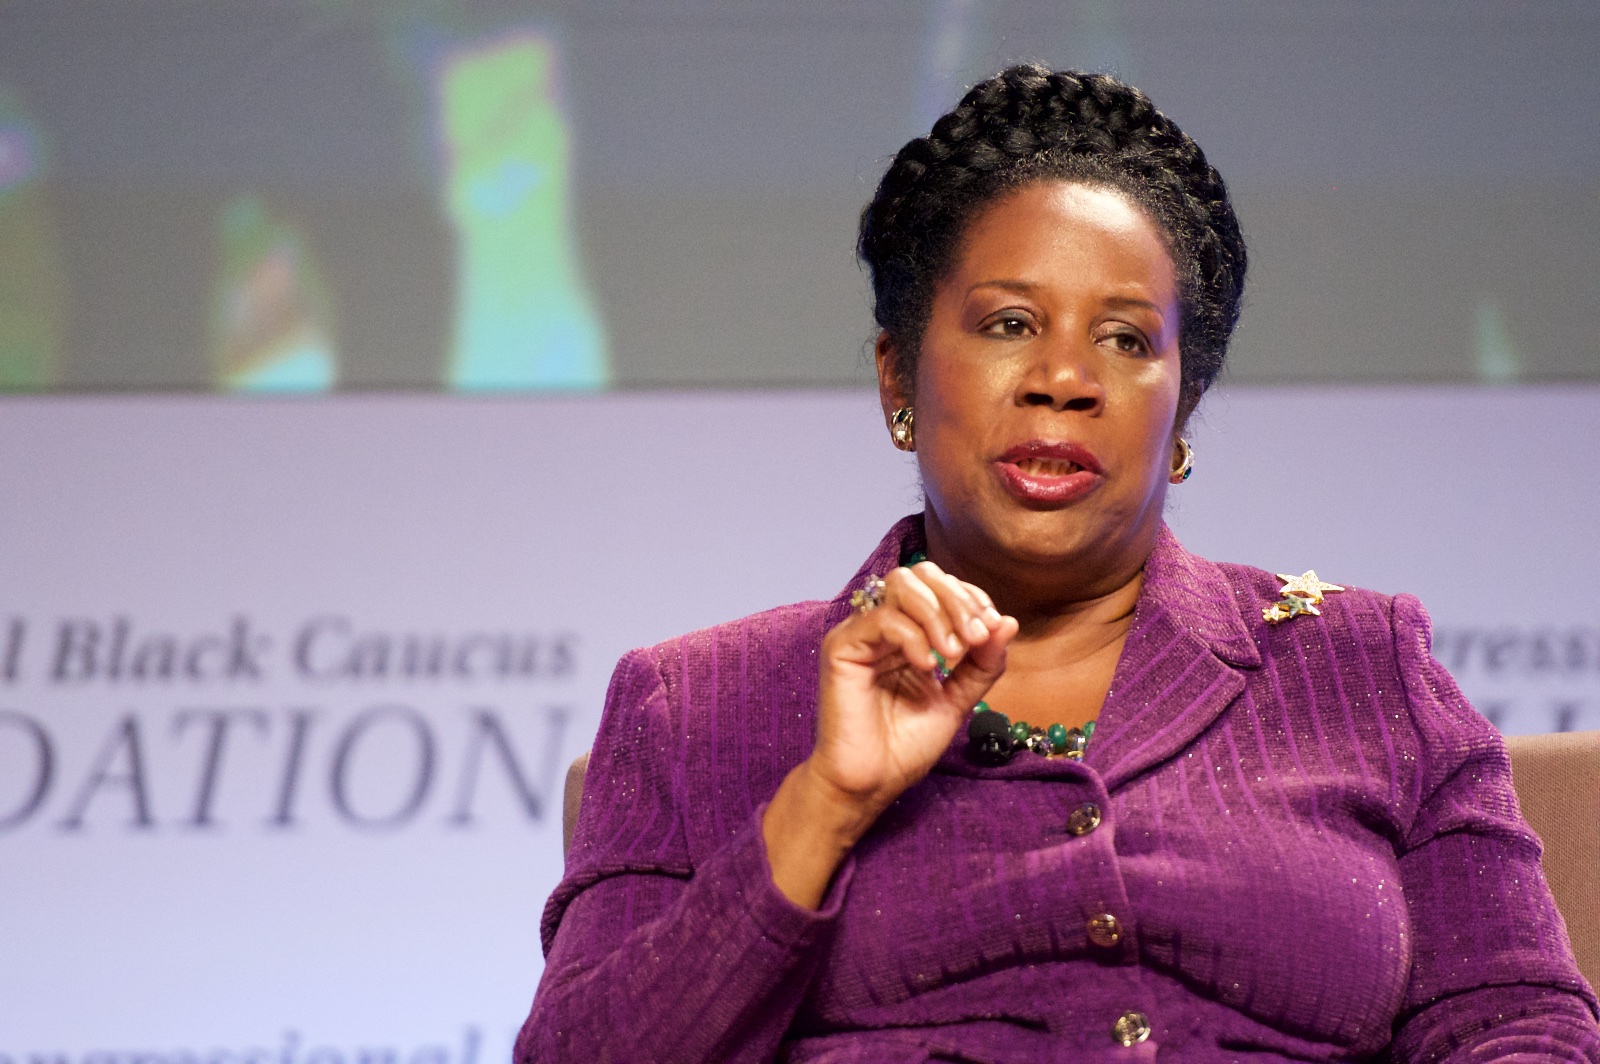 U.S. Representative Sheila Jackson Lee serves as a panelist at the National Town Hall: 'Black Lives Matter' discussion at Walter E. Washington Convention Center in Washington, D.C., on Sept. 17, 2015.